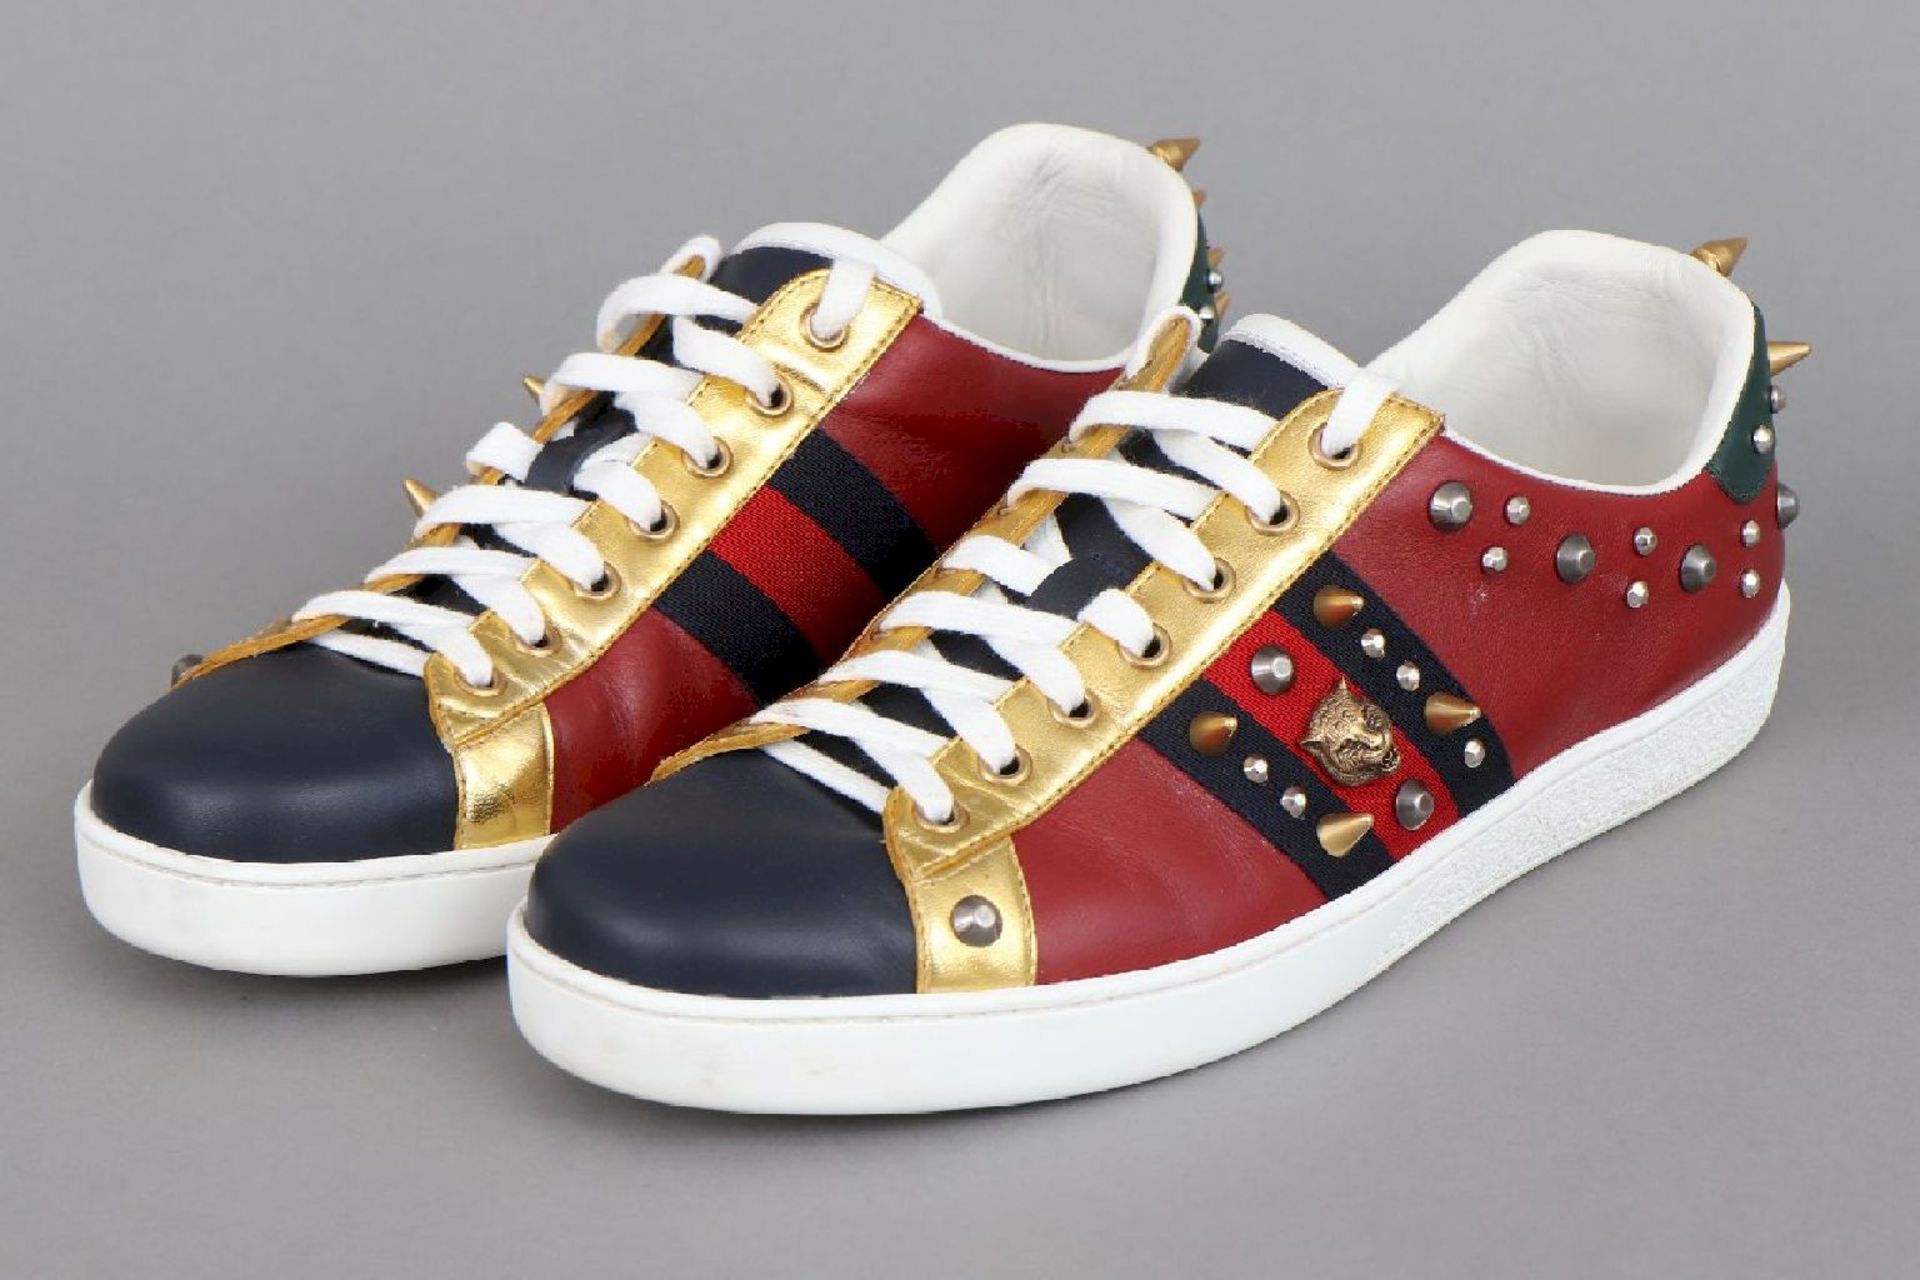 GUCCI Sneaker ACE studded - Image 2 of 8